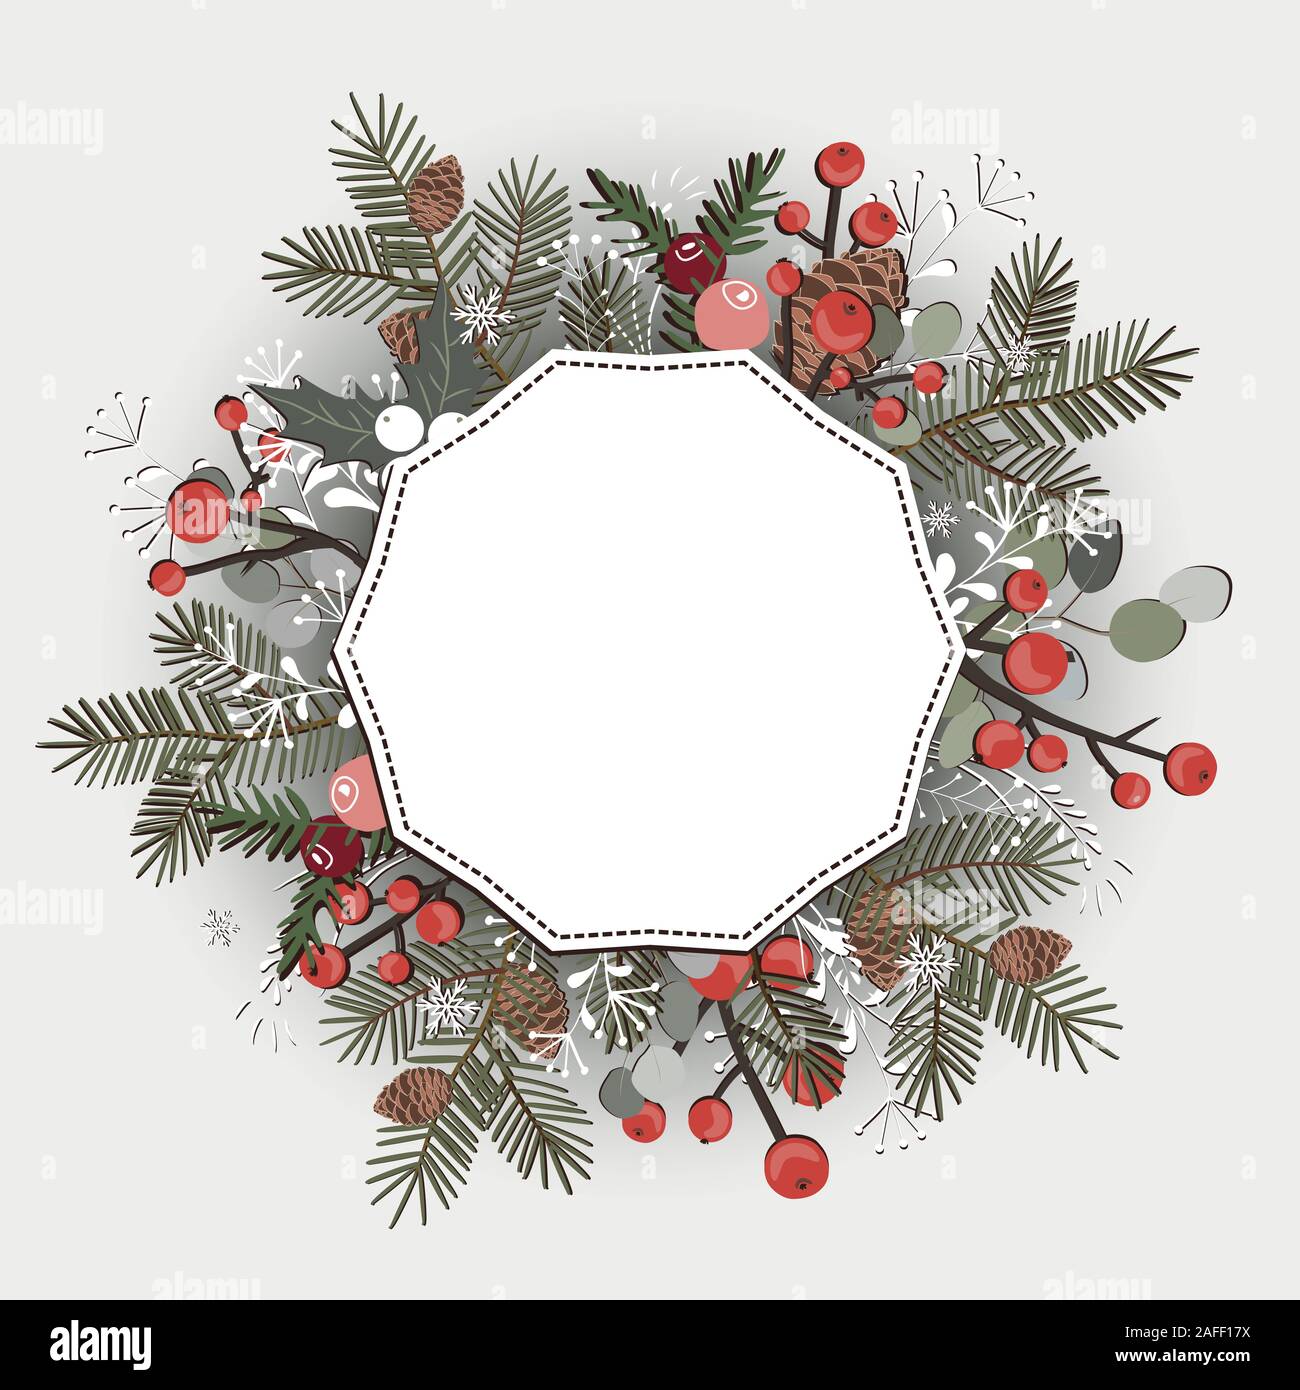 Beautiful Christmas decorative wreath greeting card. Pine branches, berries, ilex, cedar cones isolated on white background. Vector illustration Stock Vector